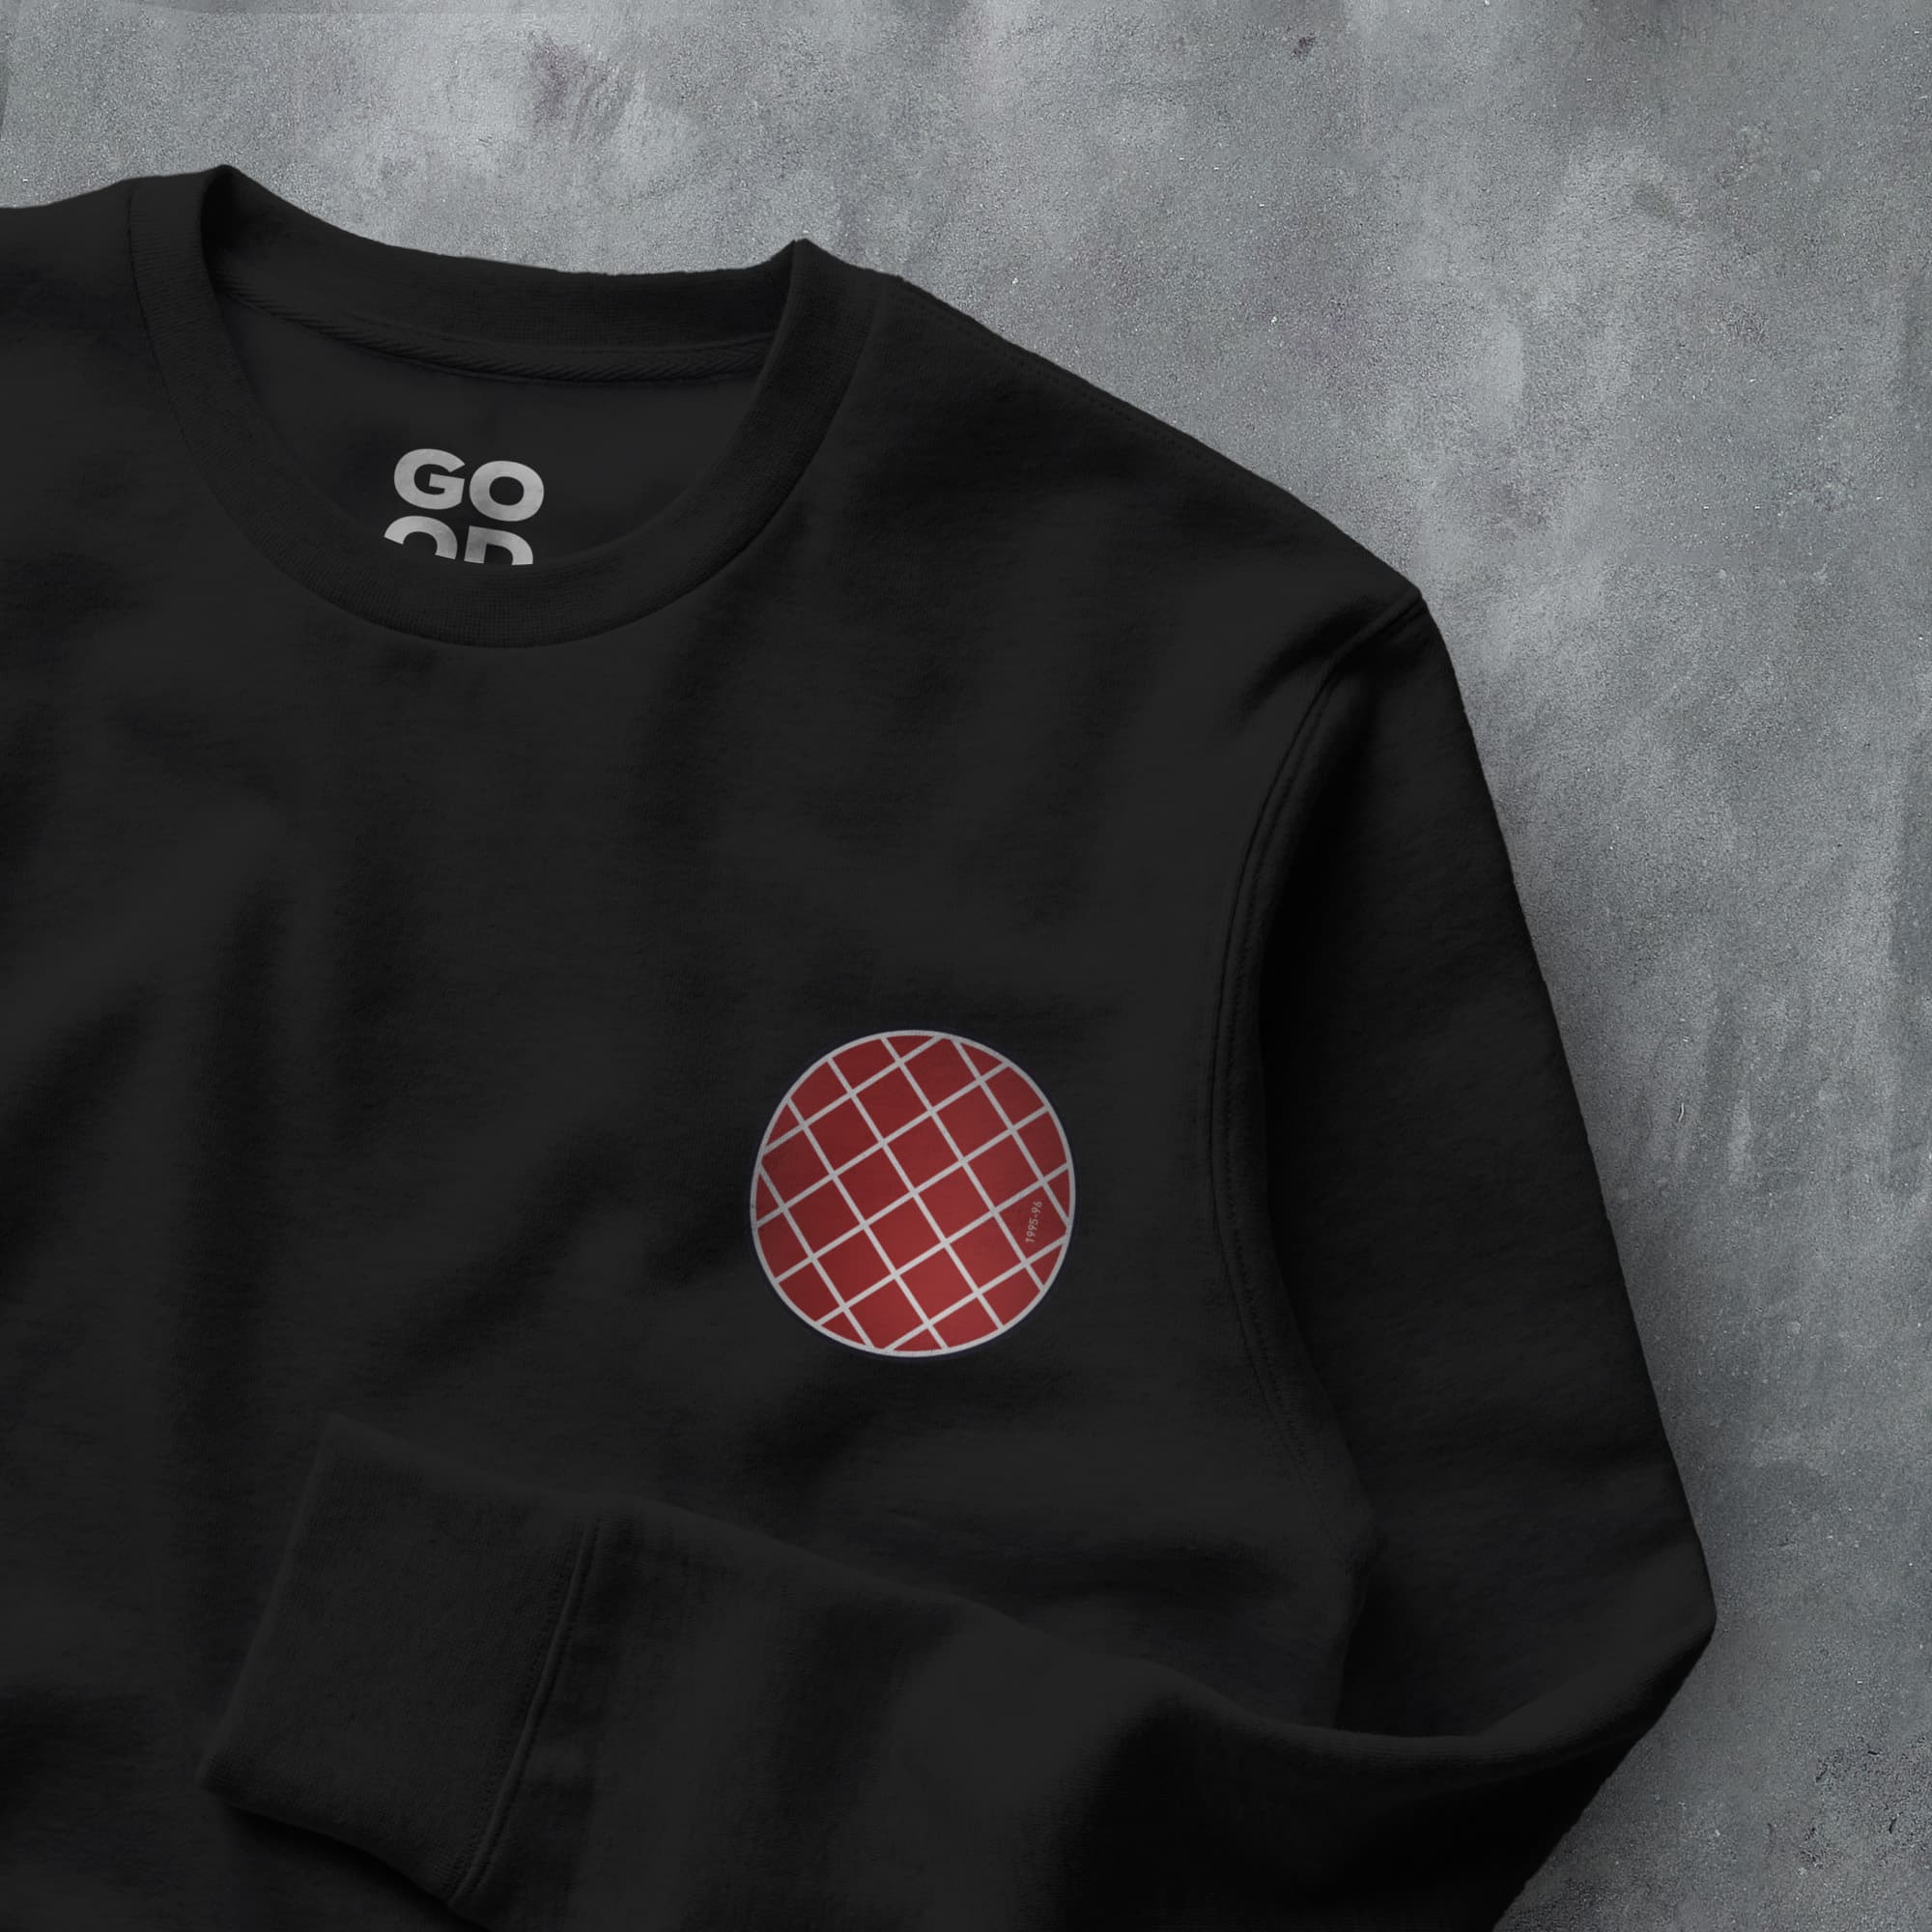 a black sweatshirt with a red and white patch on it